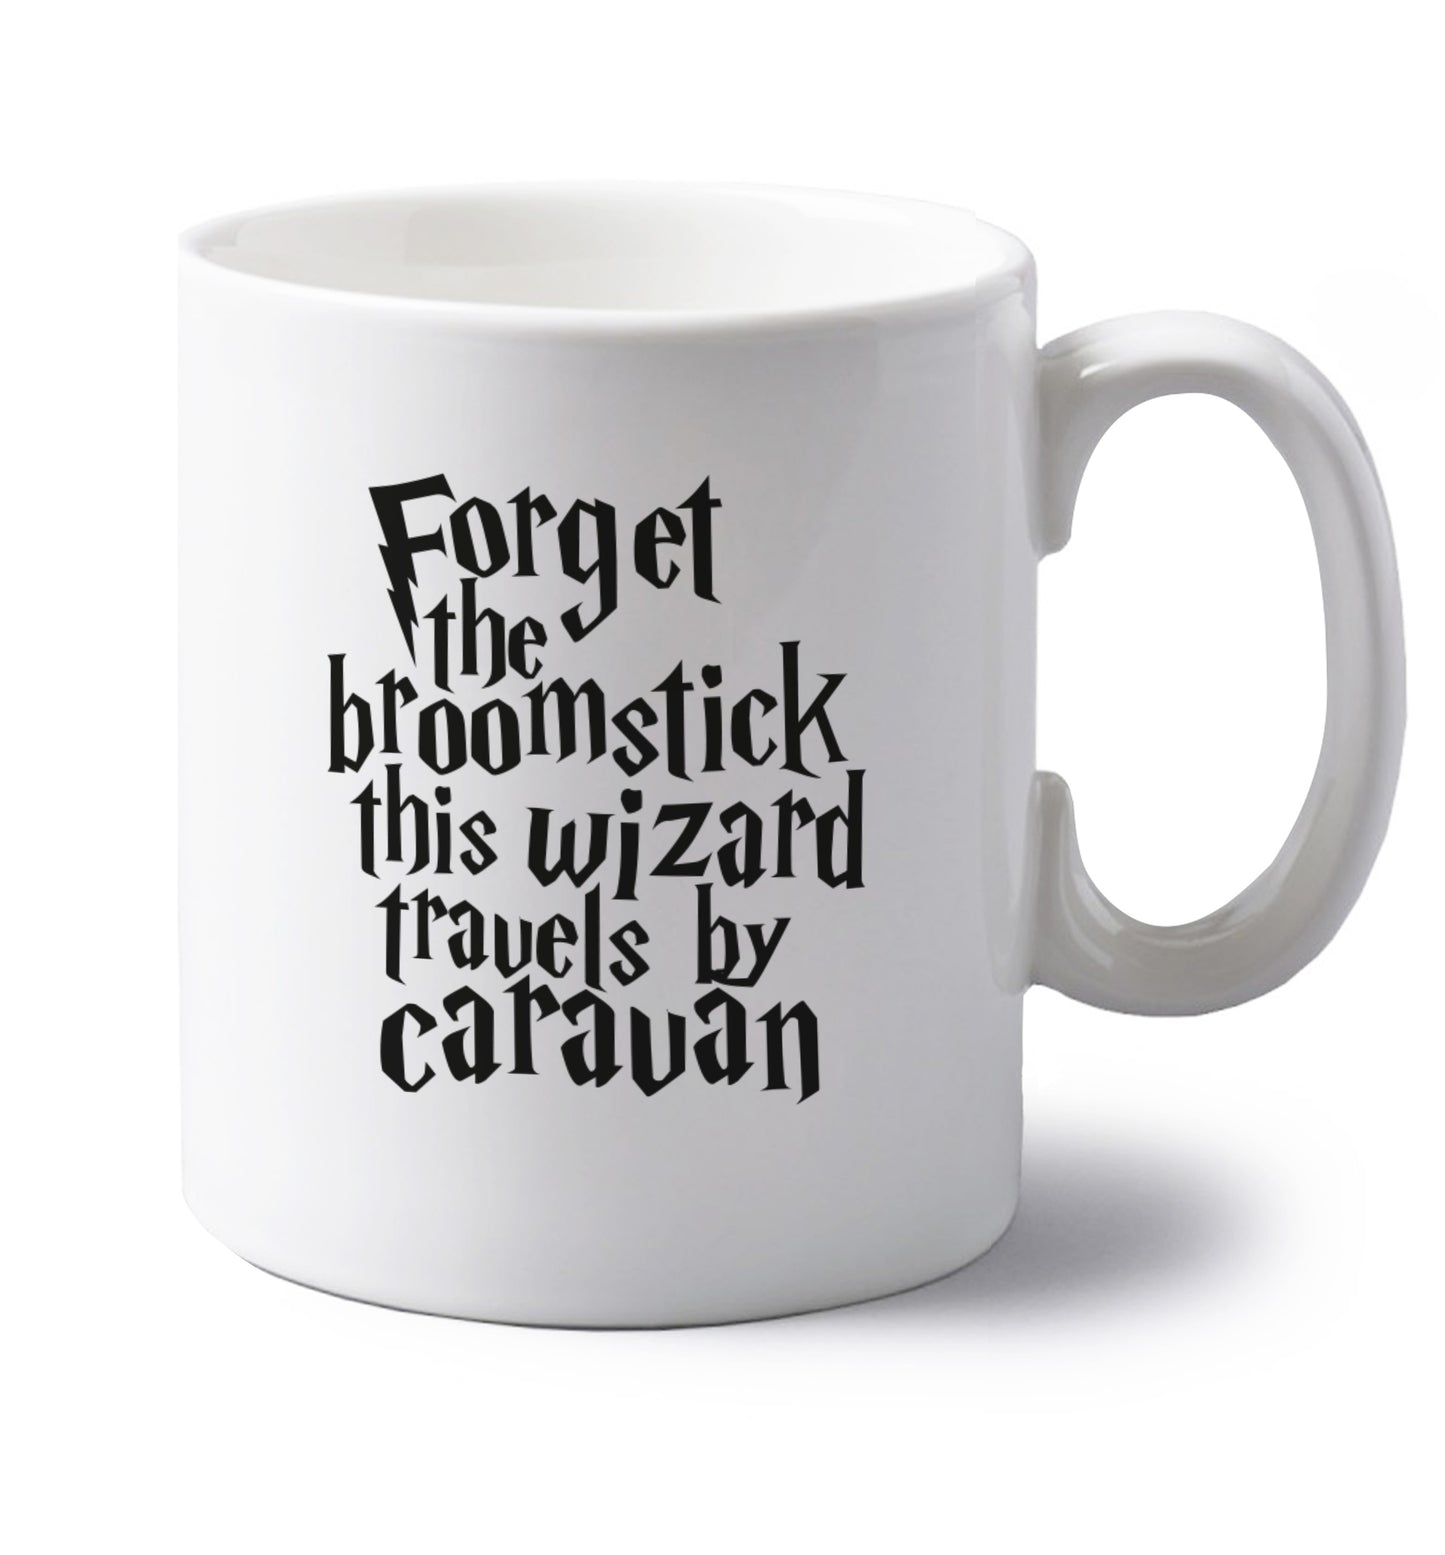 Forget the broomstick this wizard travels by caravan left handed white ceramic mug 